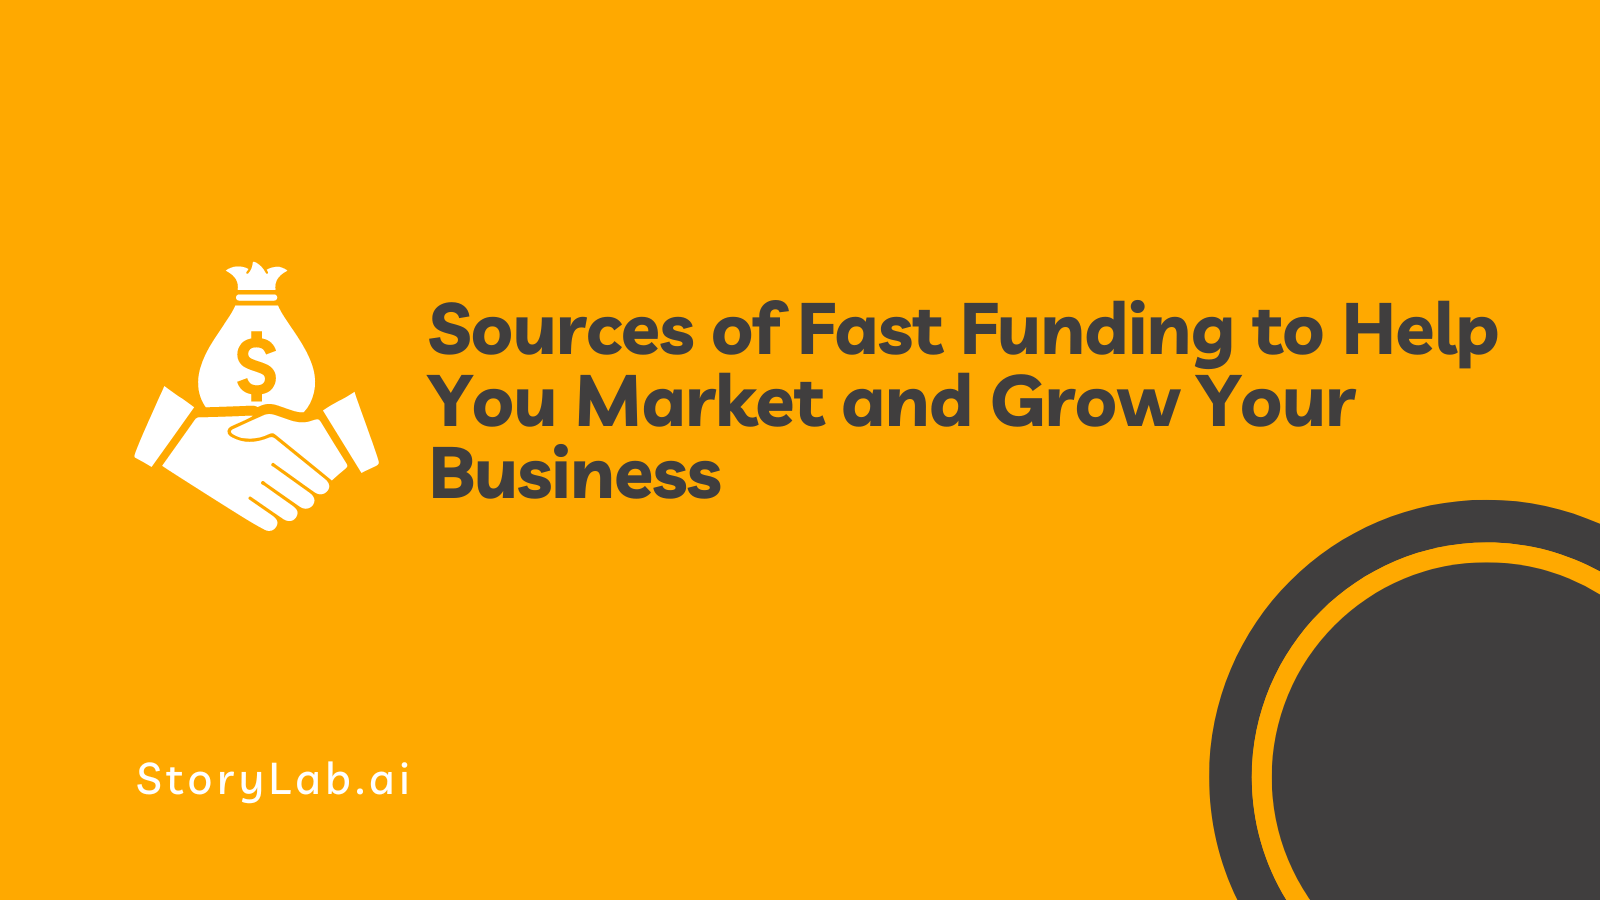 Sources of Fast Funding to Help You Market and Grow Your Business